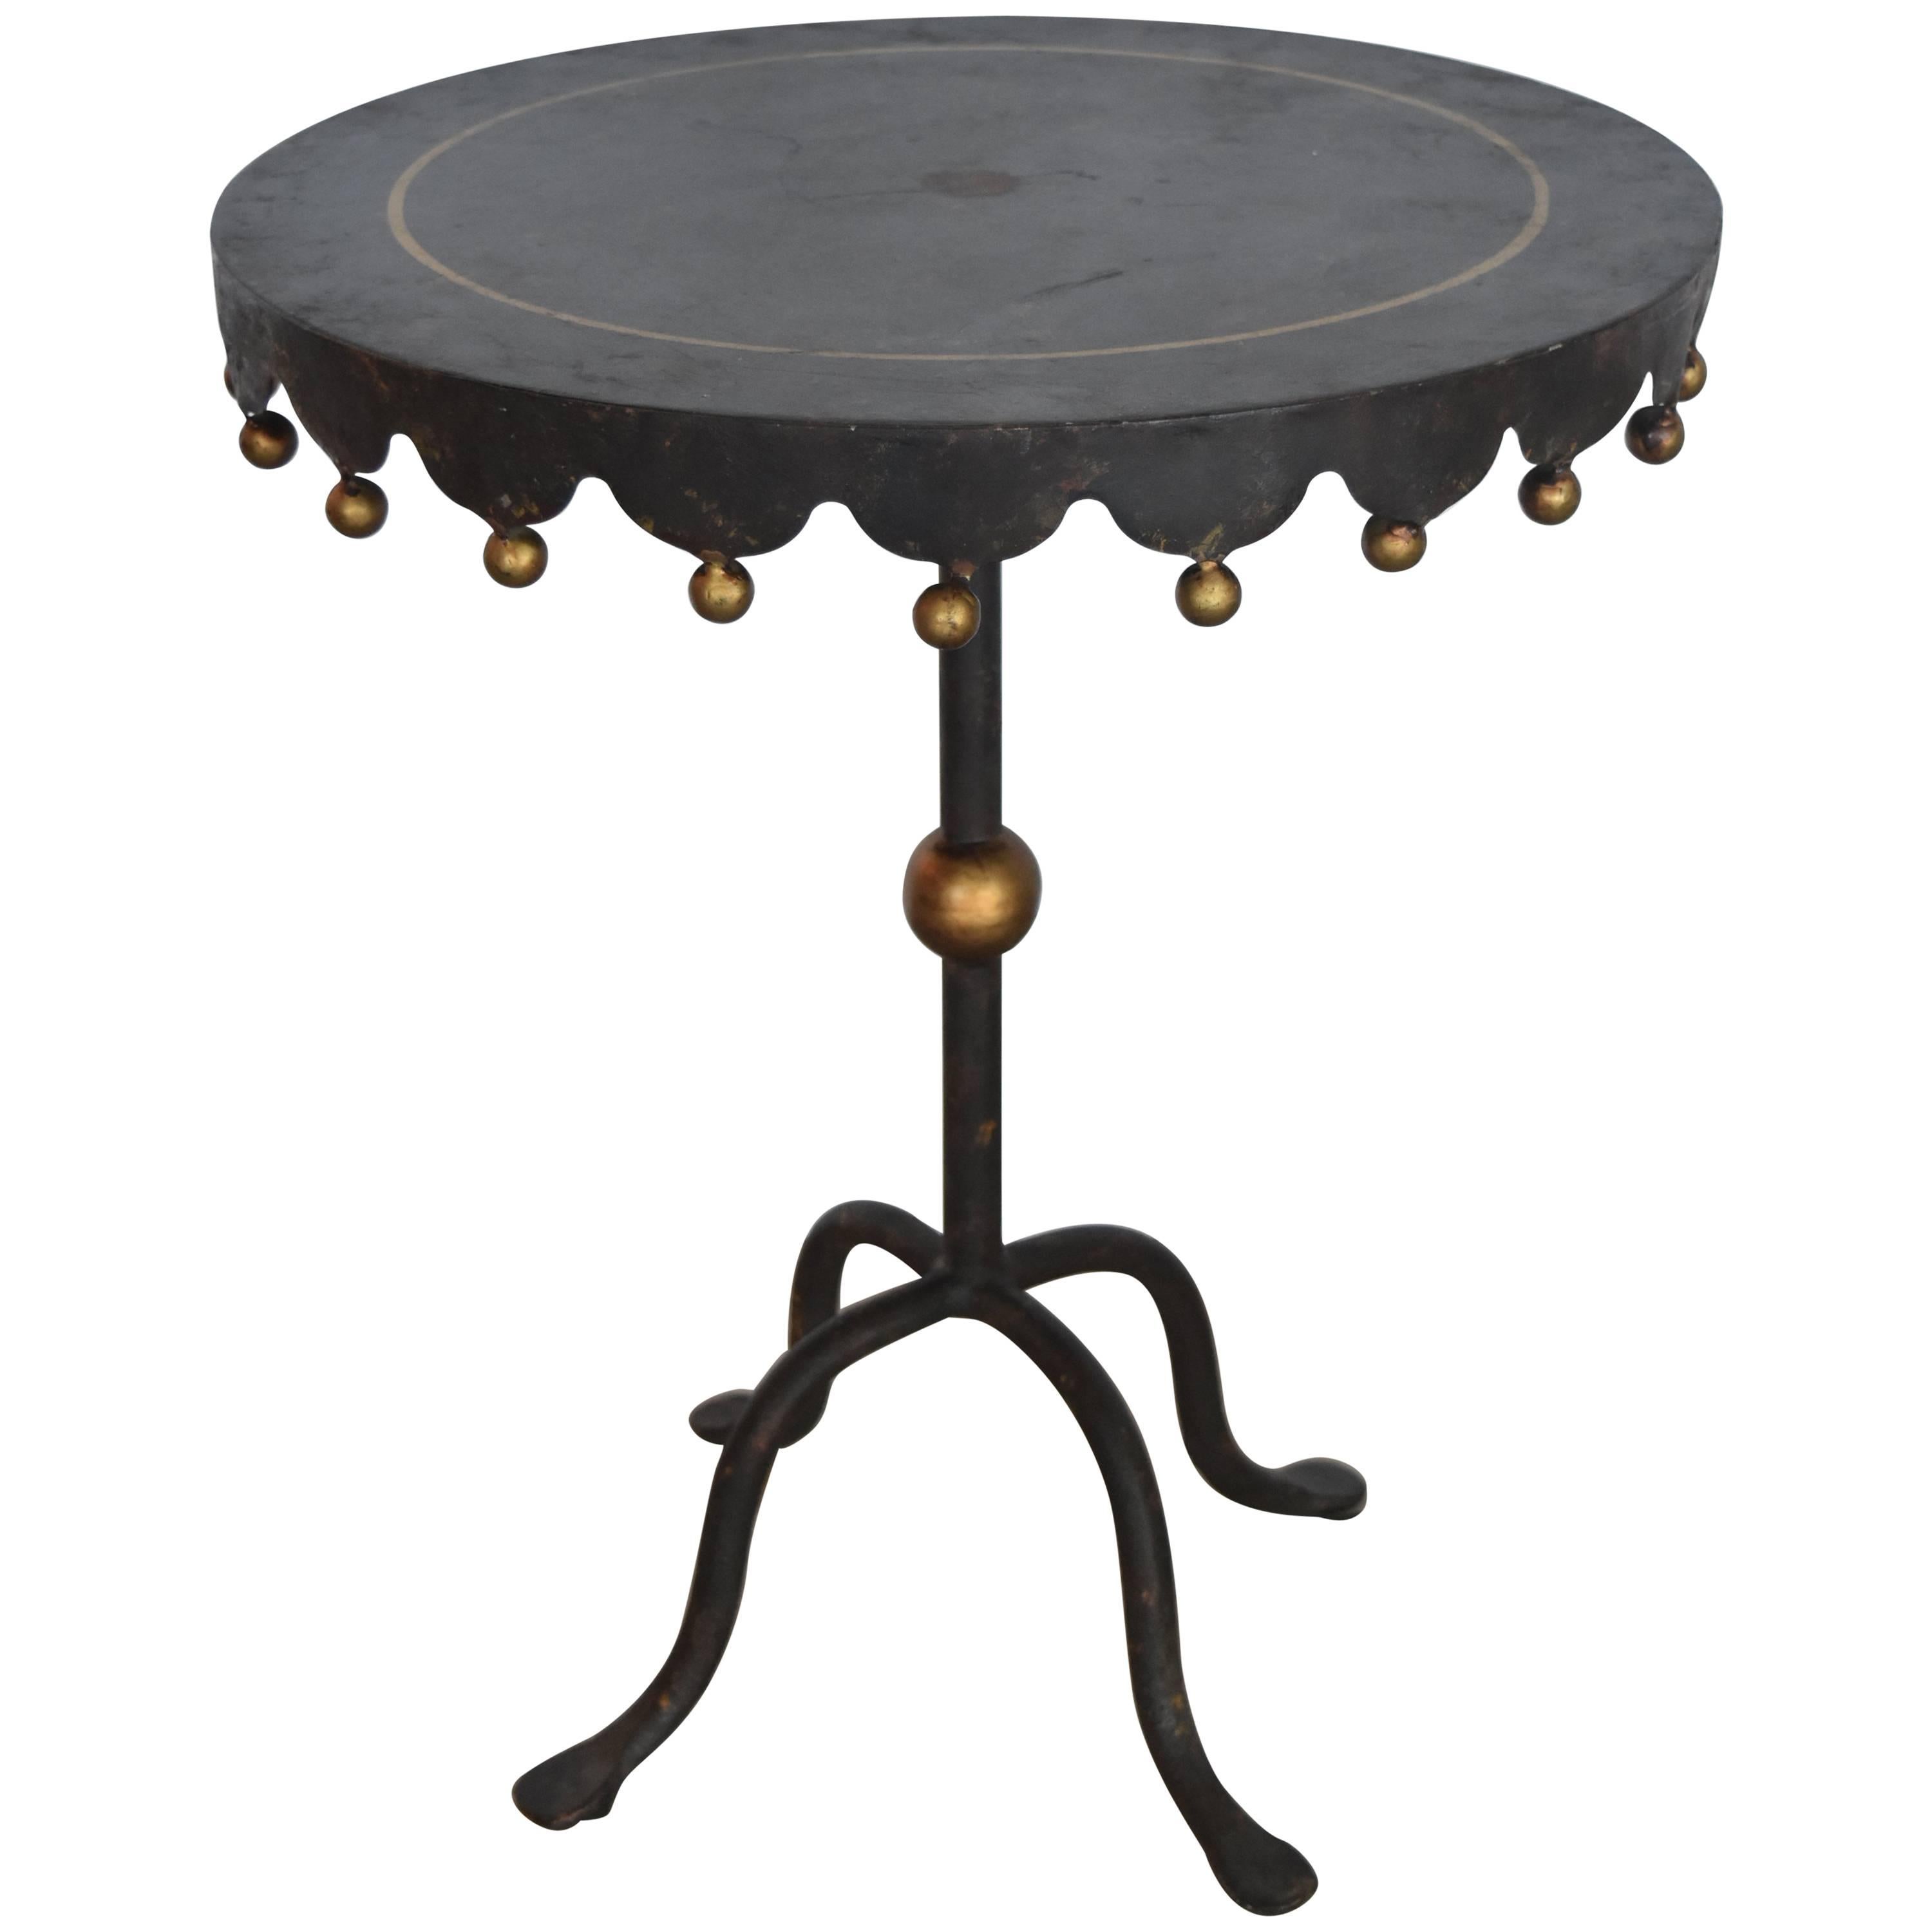 Midcentury Iron Round Side Table from Spain with Gold Gilt Detail